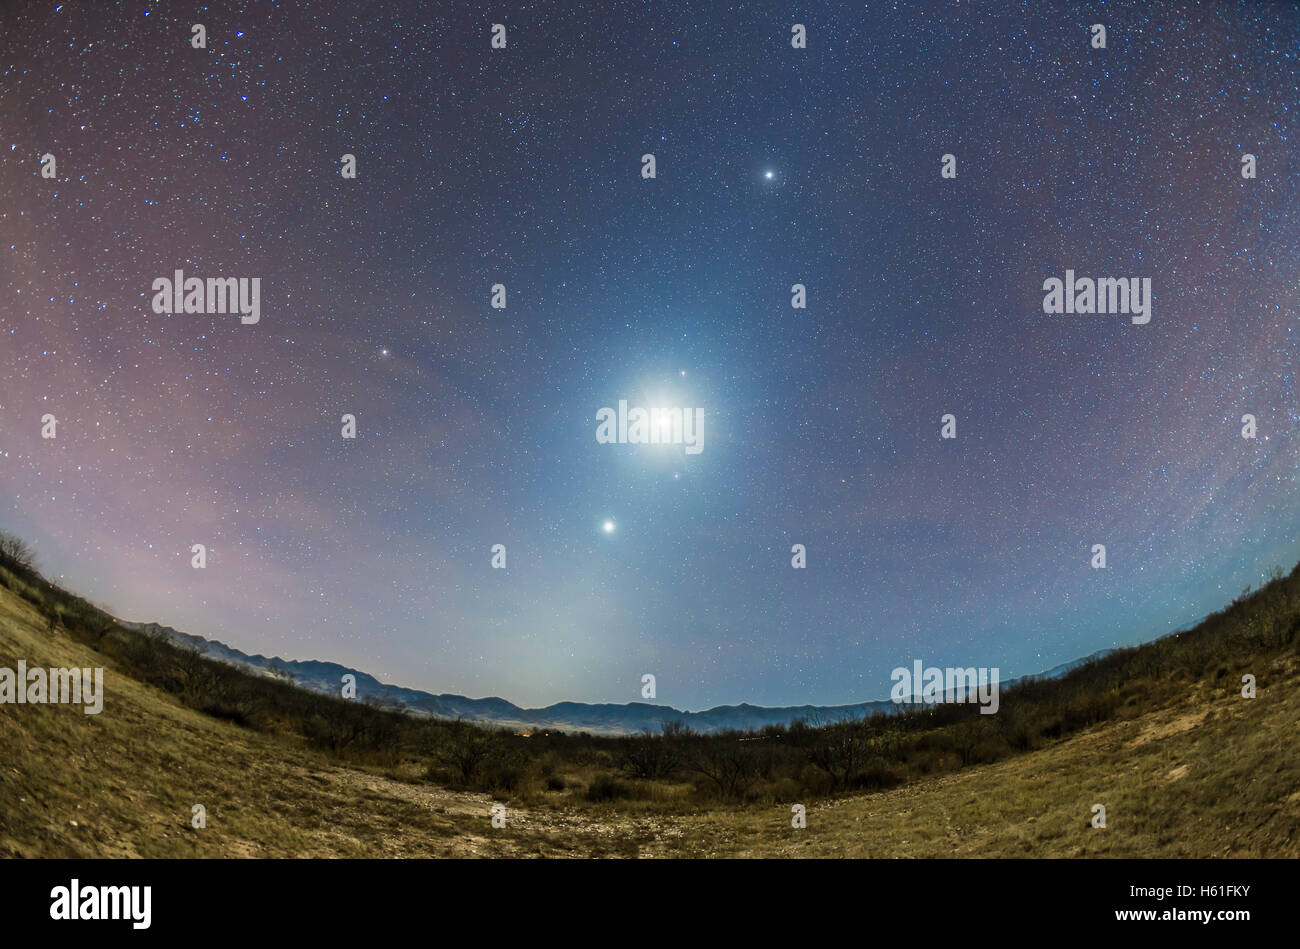 The Zodiacal Light of a late autumn/early winter morning faintly visible amid the moonlight from the waning crescent Moon, at ce Stock Photo